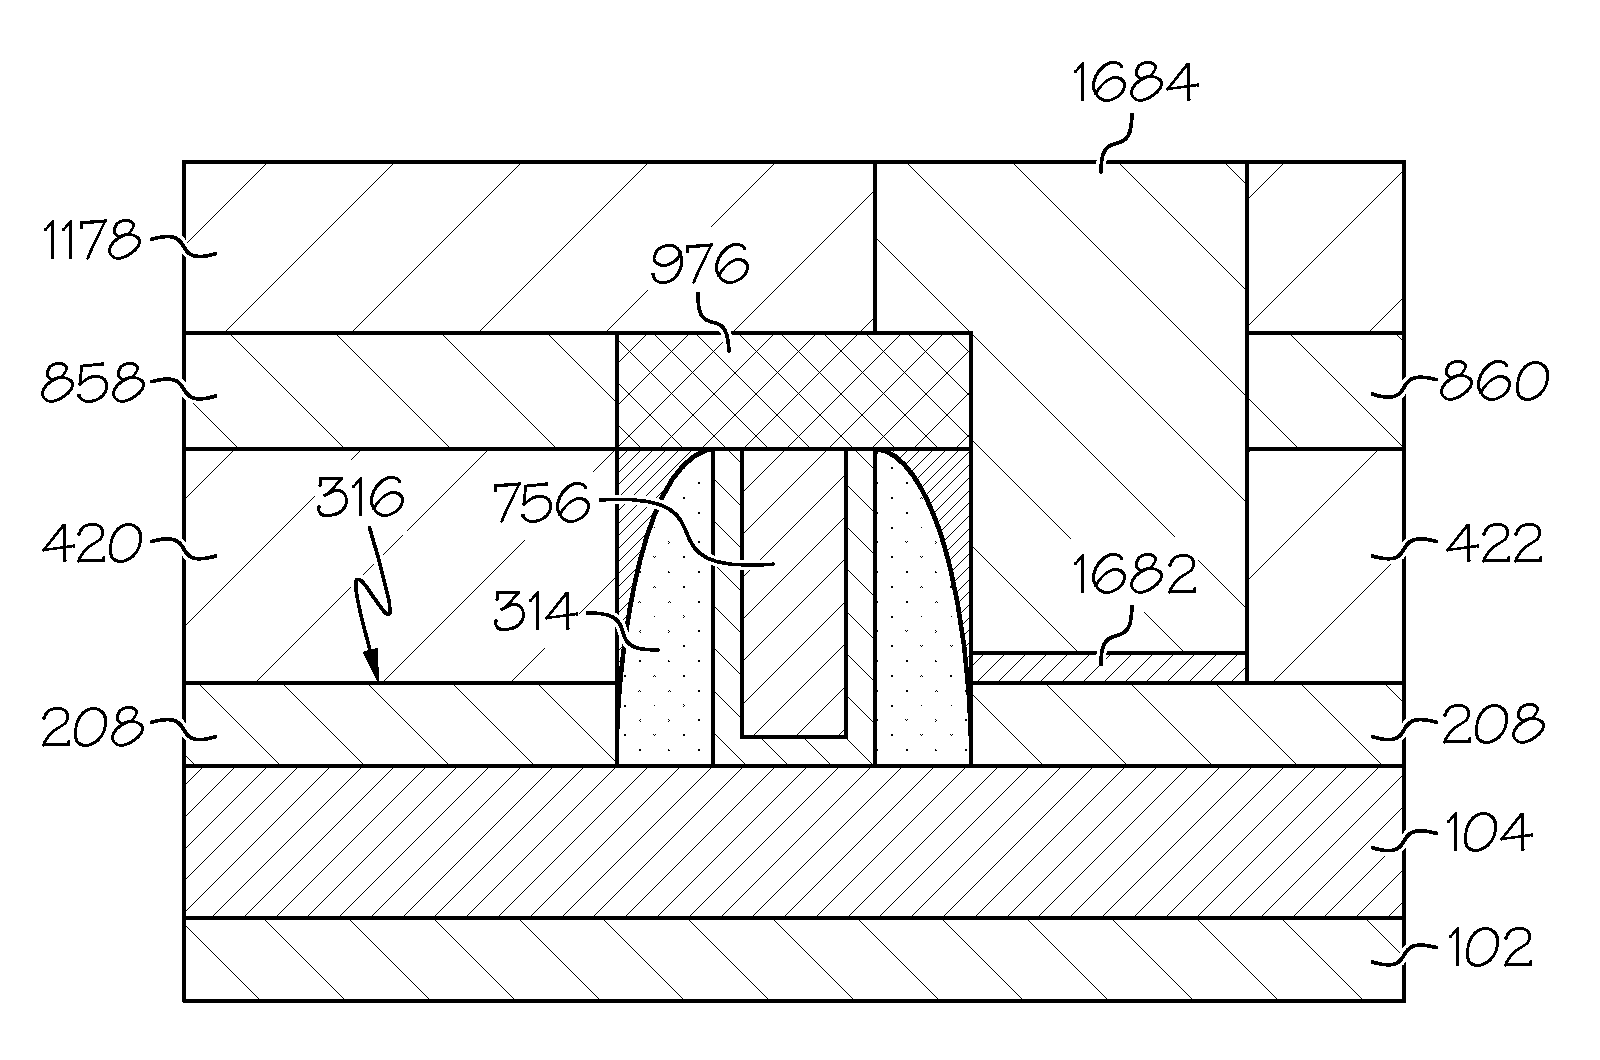 Self-aligned contact process enabled by low temperature